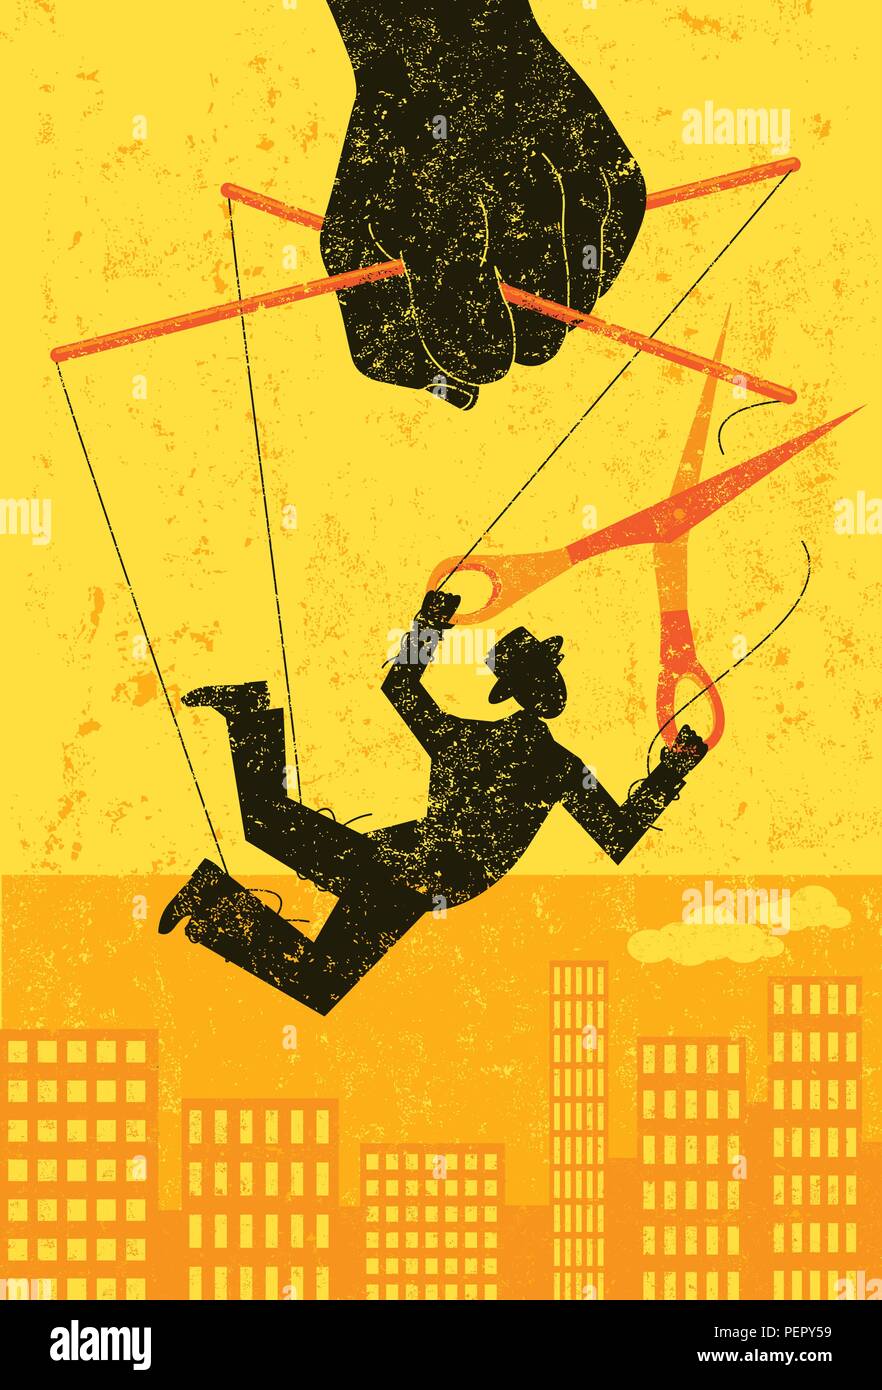 Escaping a controlling boss. A businessman, portrayed as a puppet on a string, cuts himself away to gain his freedom. Stock Vector